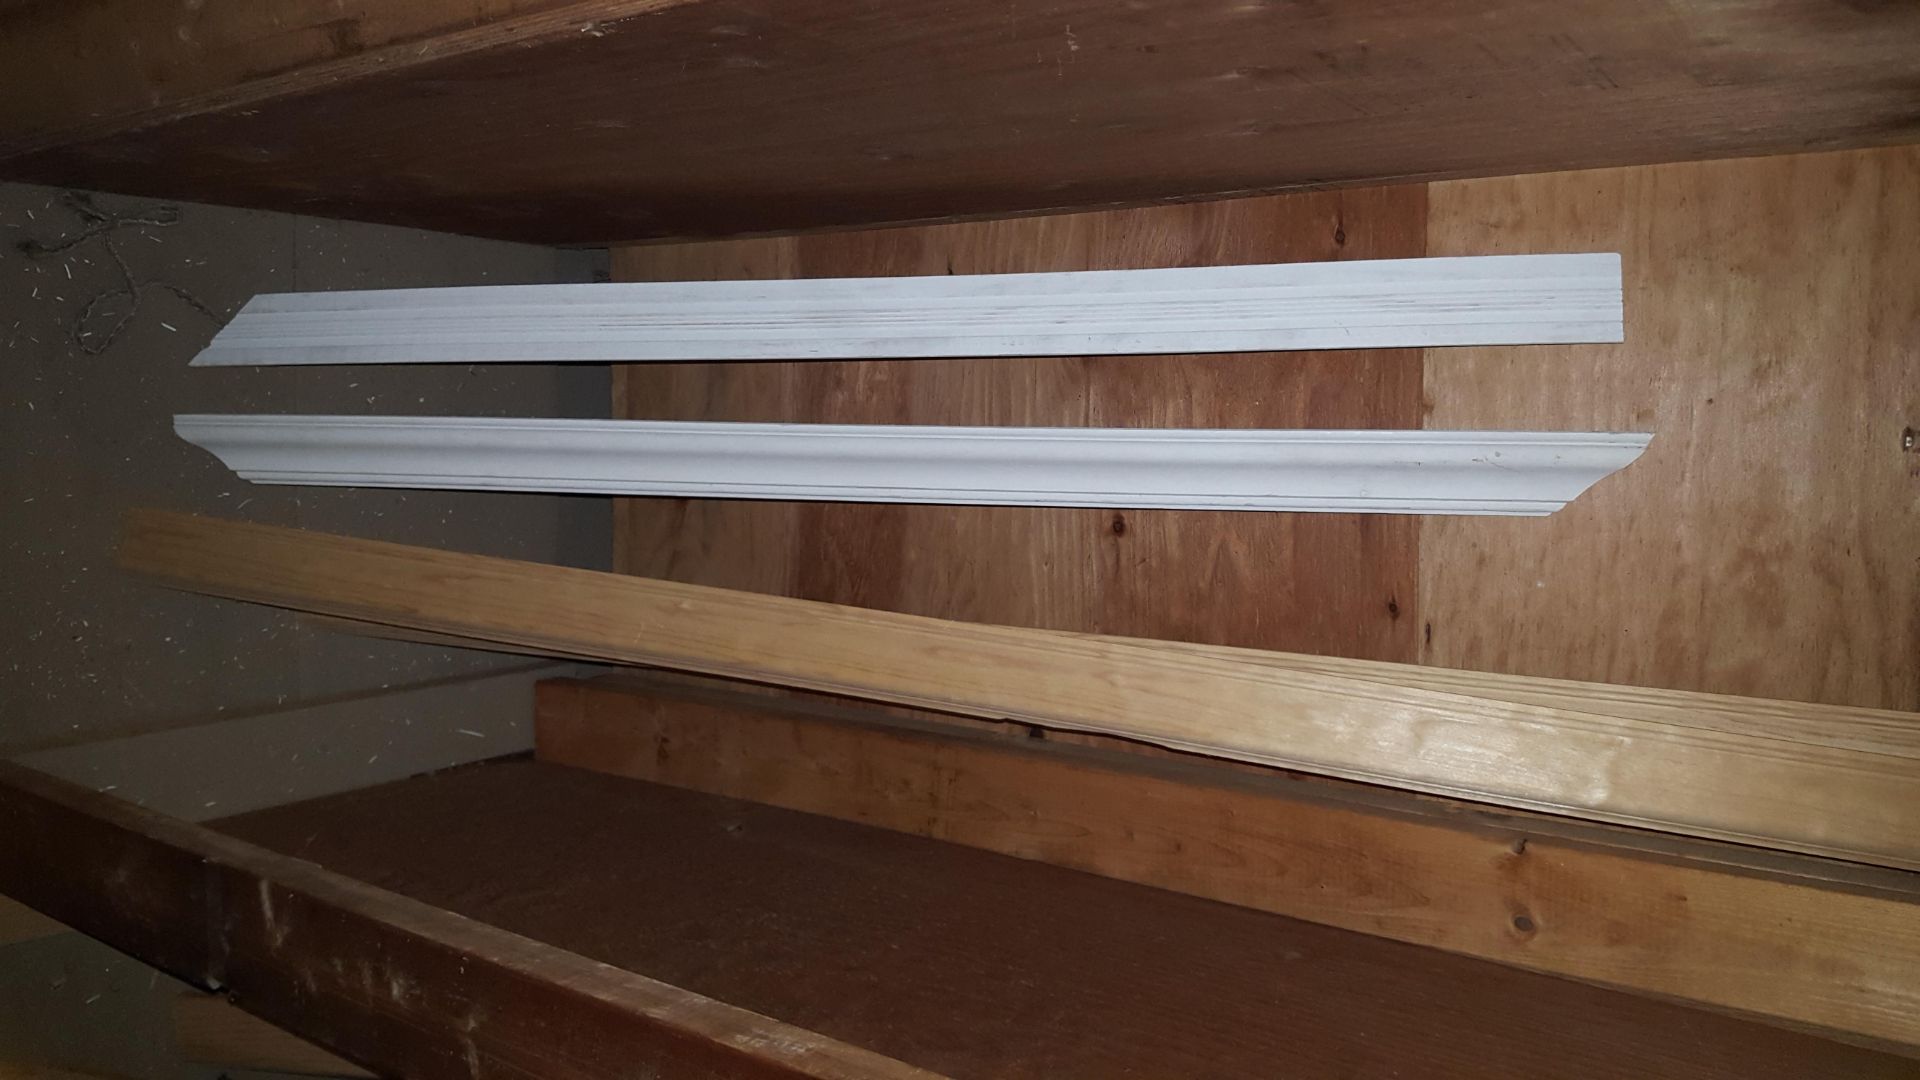 Lot of 333 linear ft. of assorted wood molding, including 15 ft. of 2 5/8 in. chair rail, clear